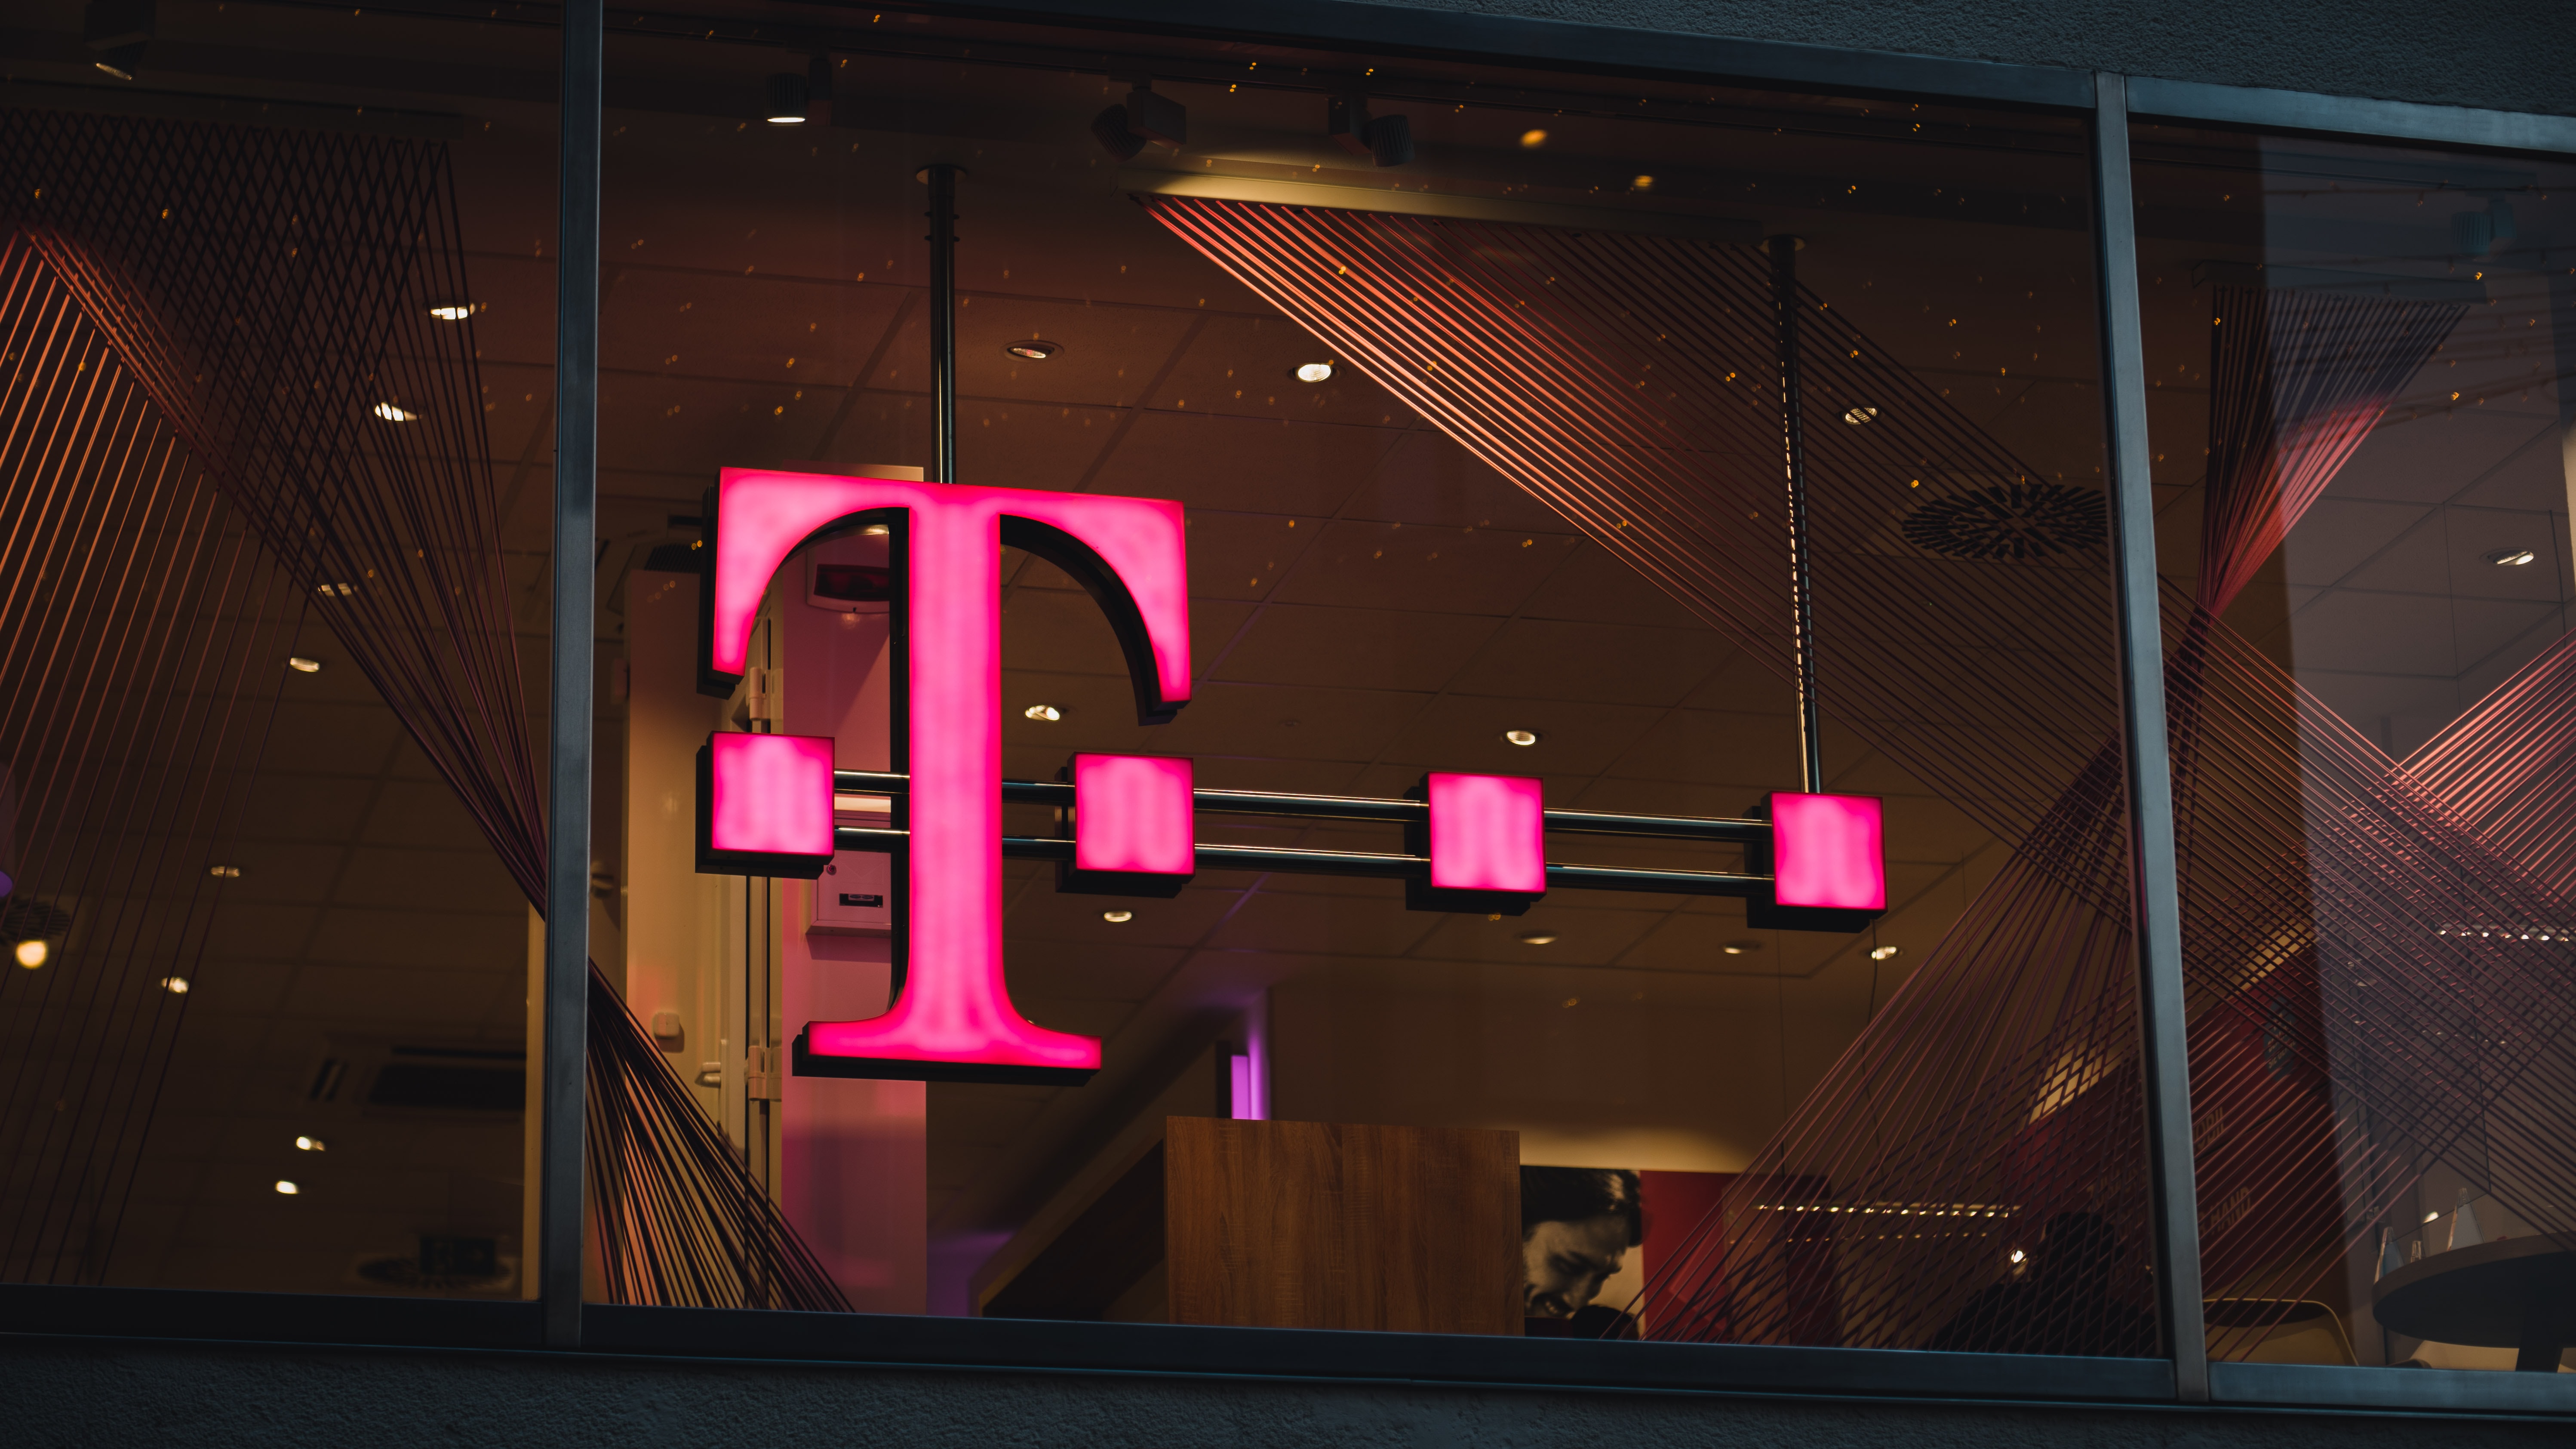 T-Mobile Hack 2021—What Hard Lessons Must We Learn?